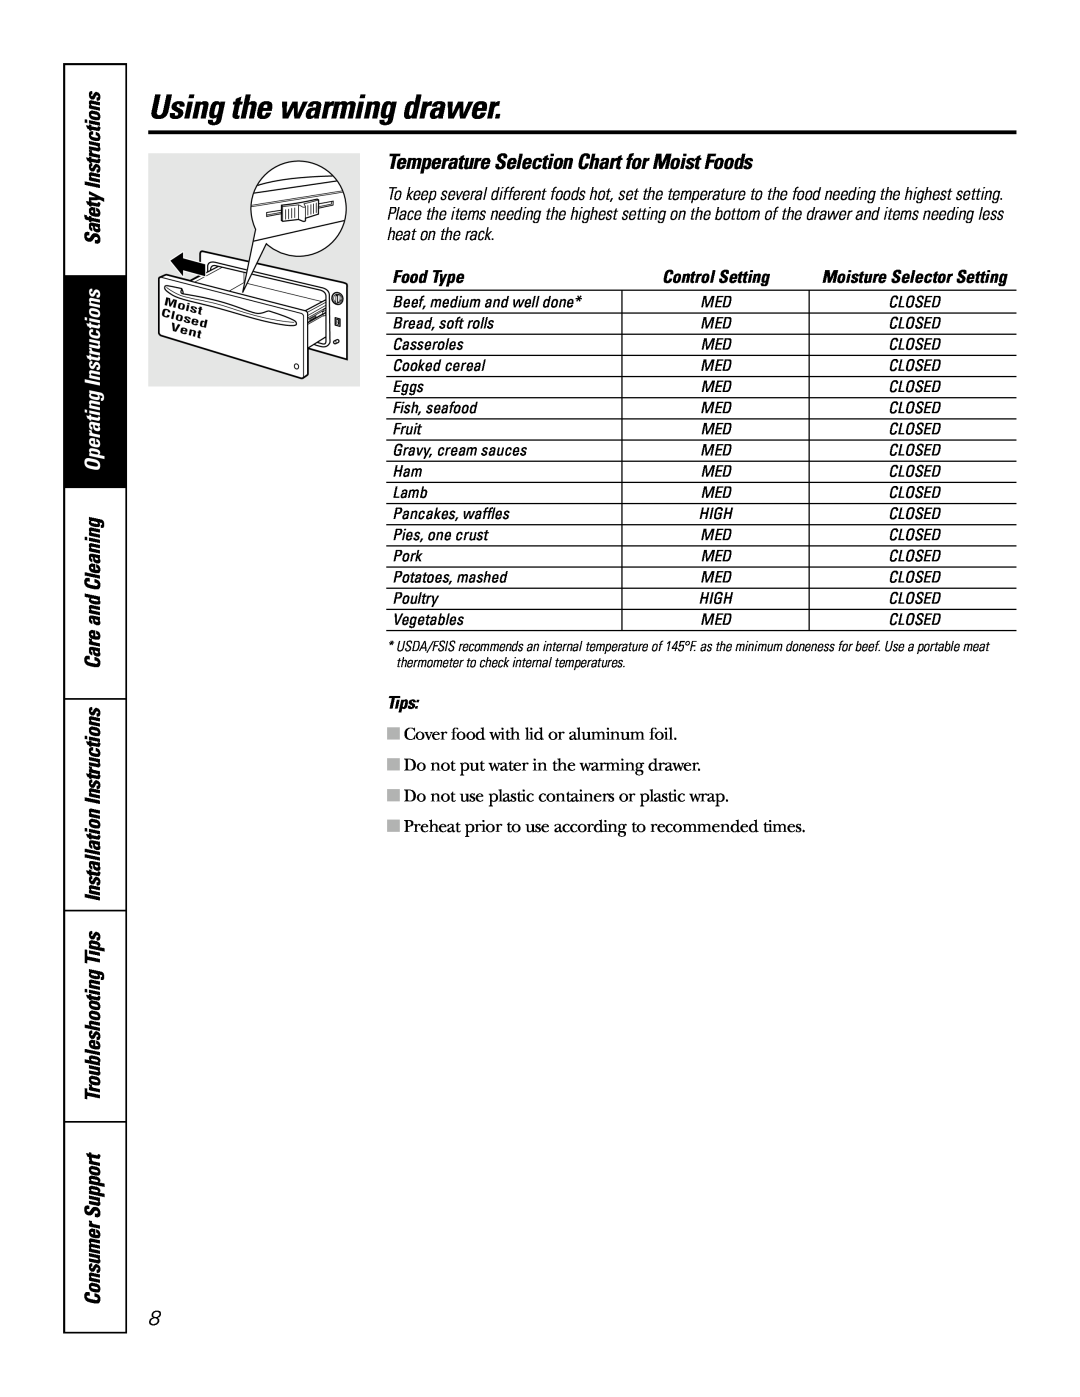 GE JTD915 owner manual Temperature Selection Chart for Moist Foods, Using the warming drawer, Food Type, Tips 